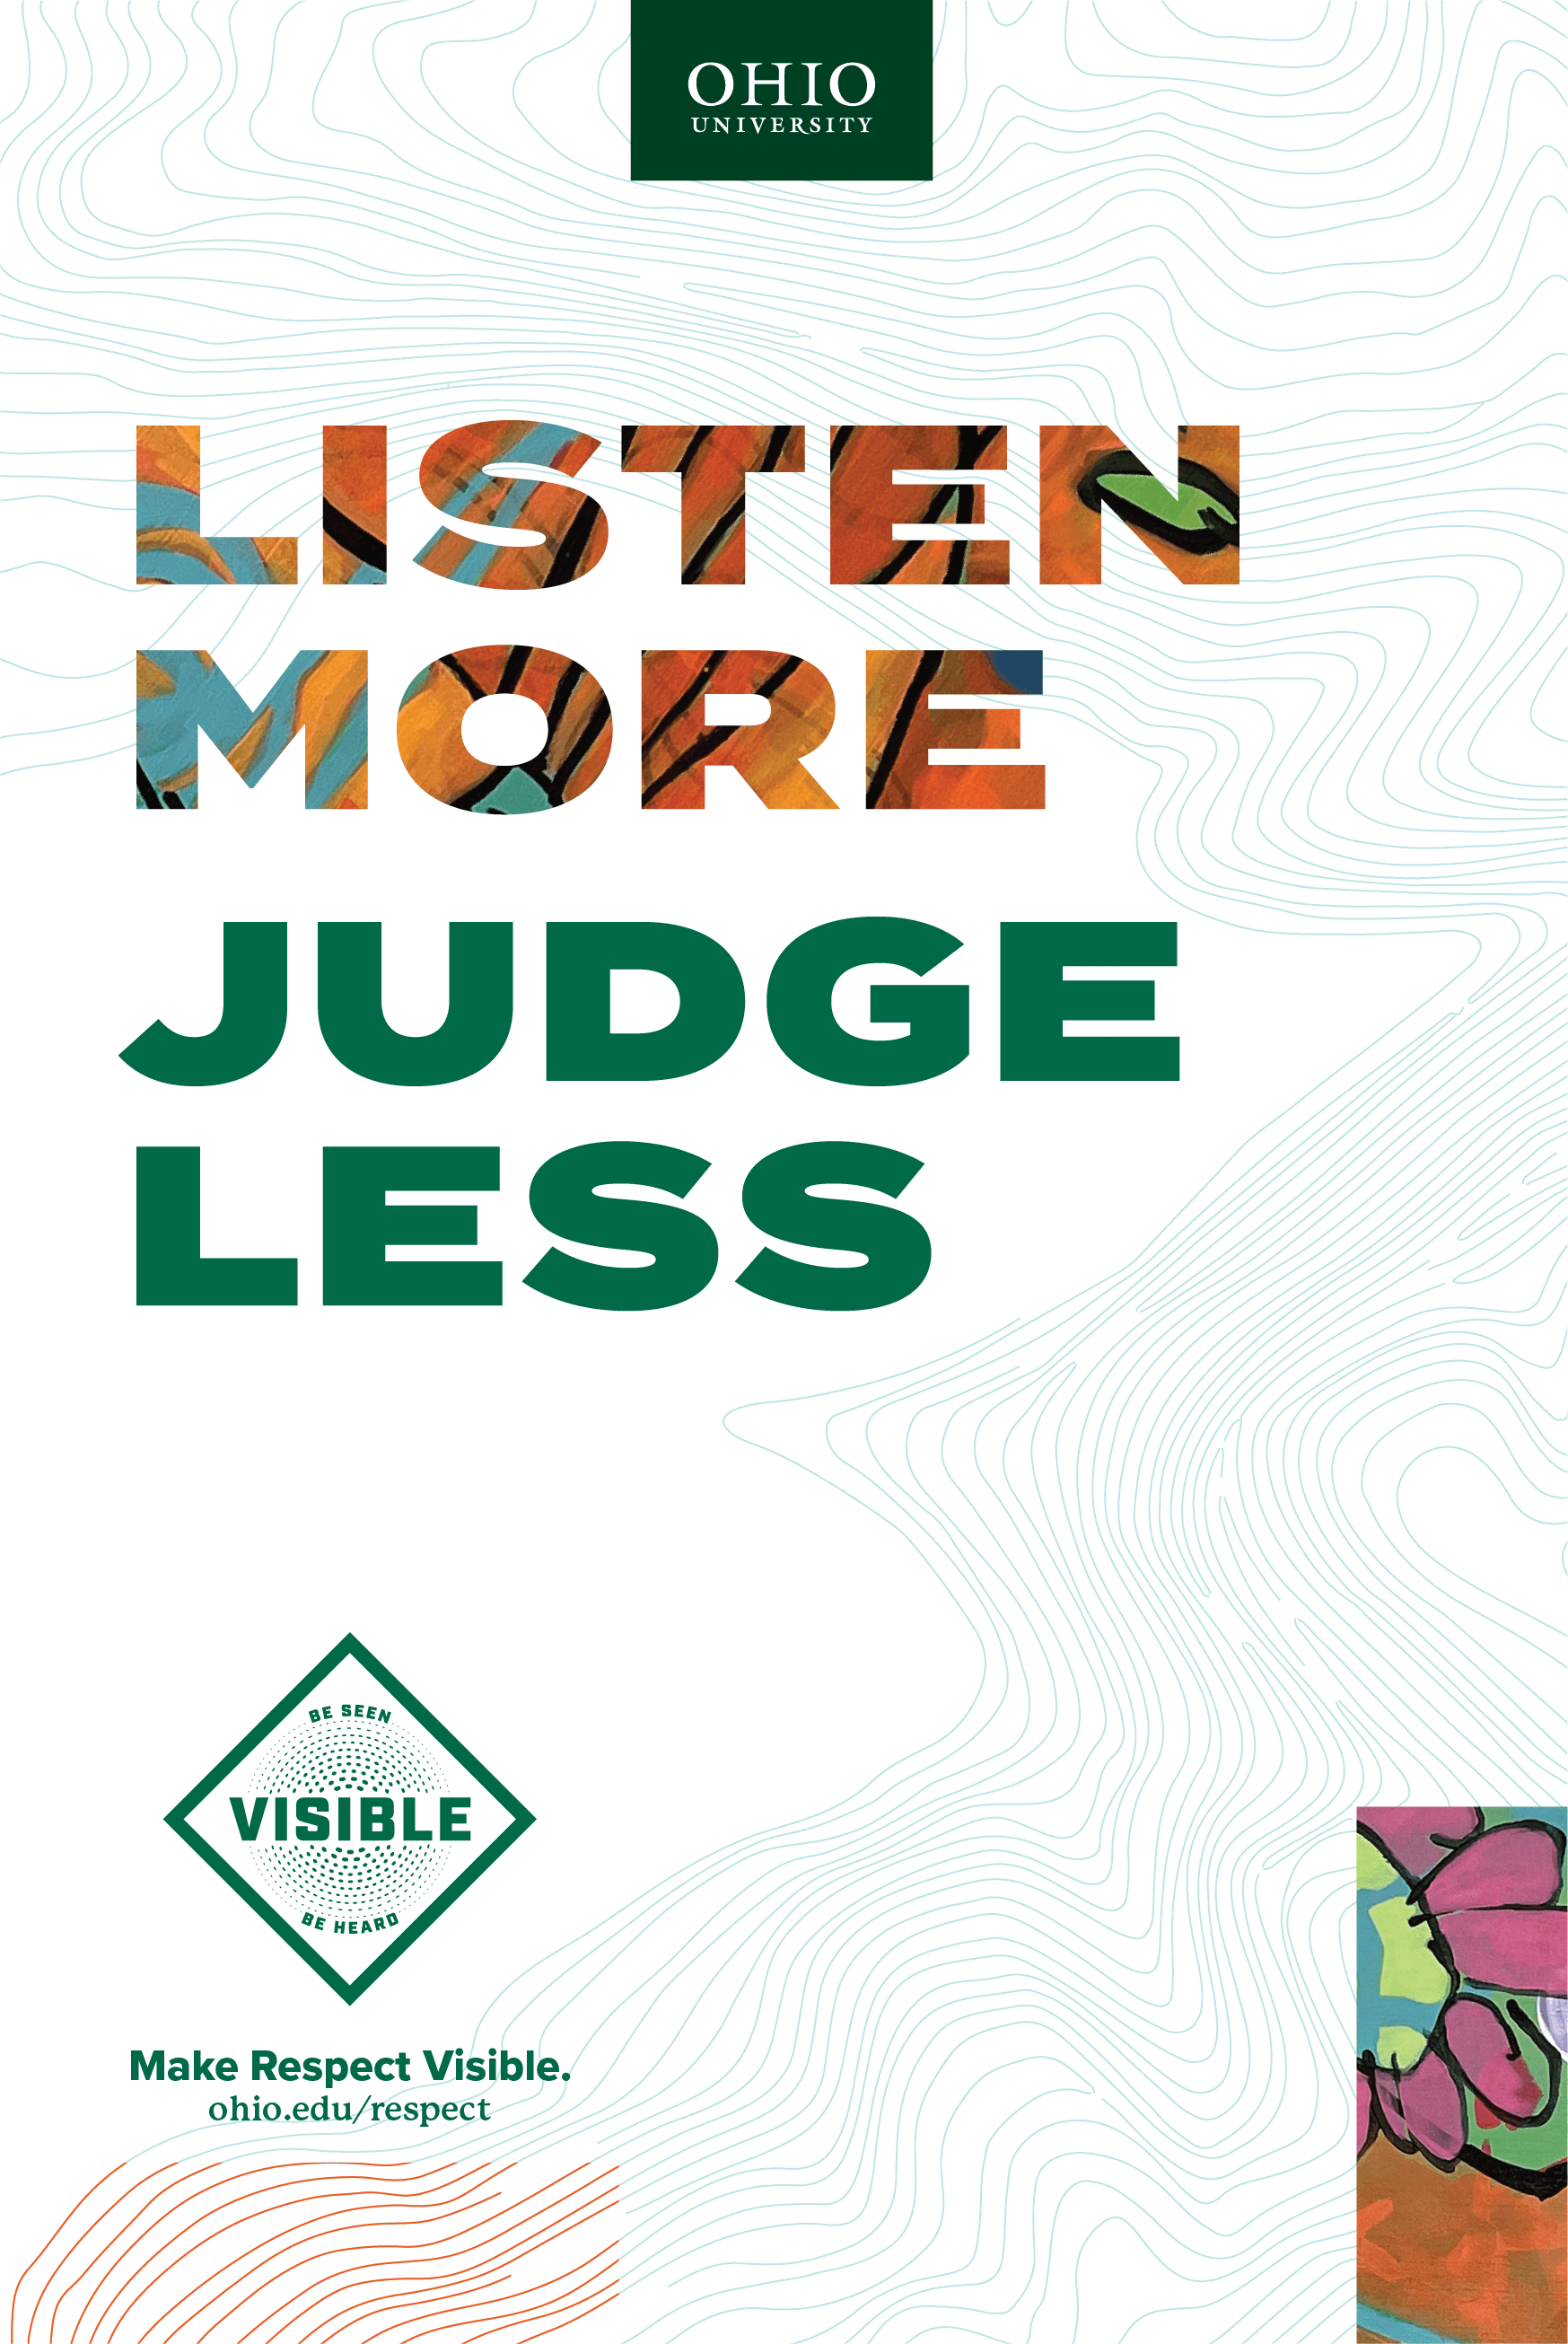 Image of the Listen More Make Respect Visible poster